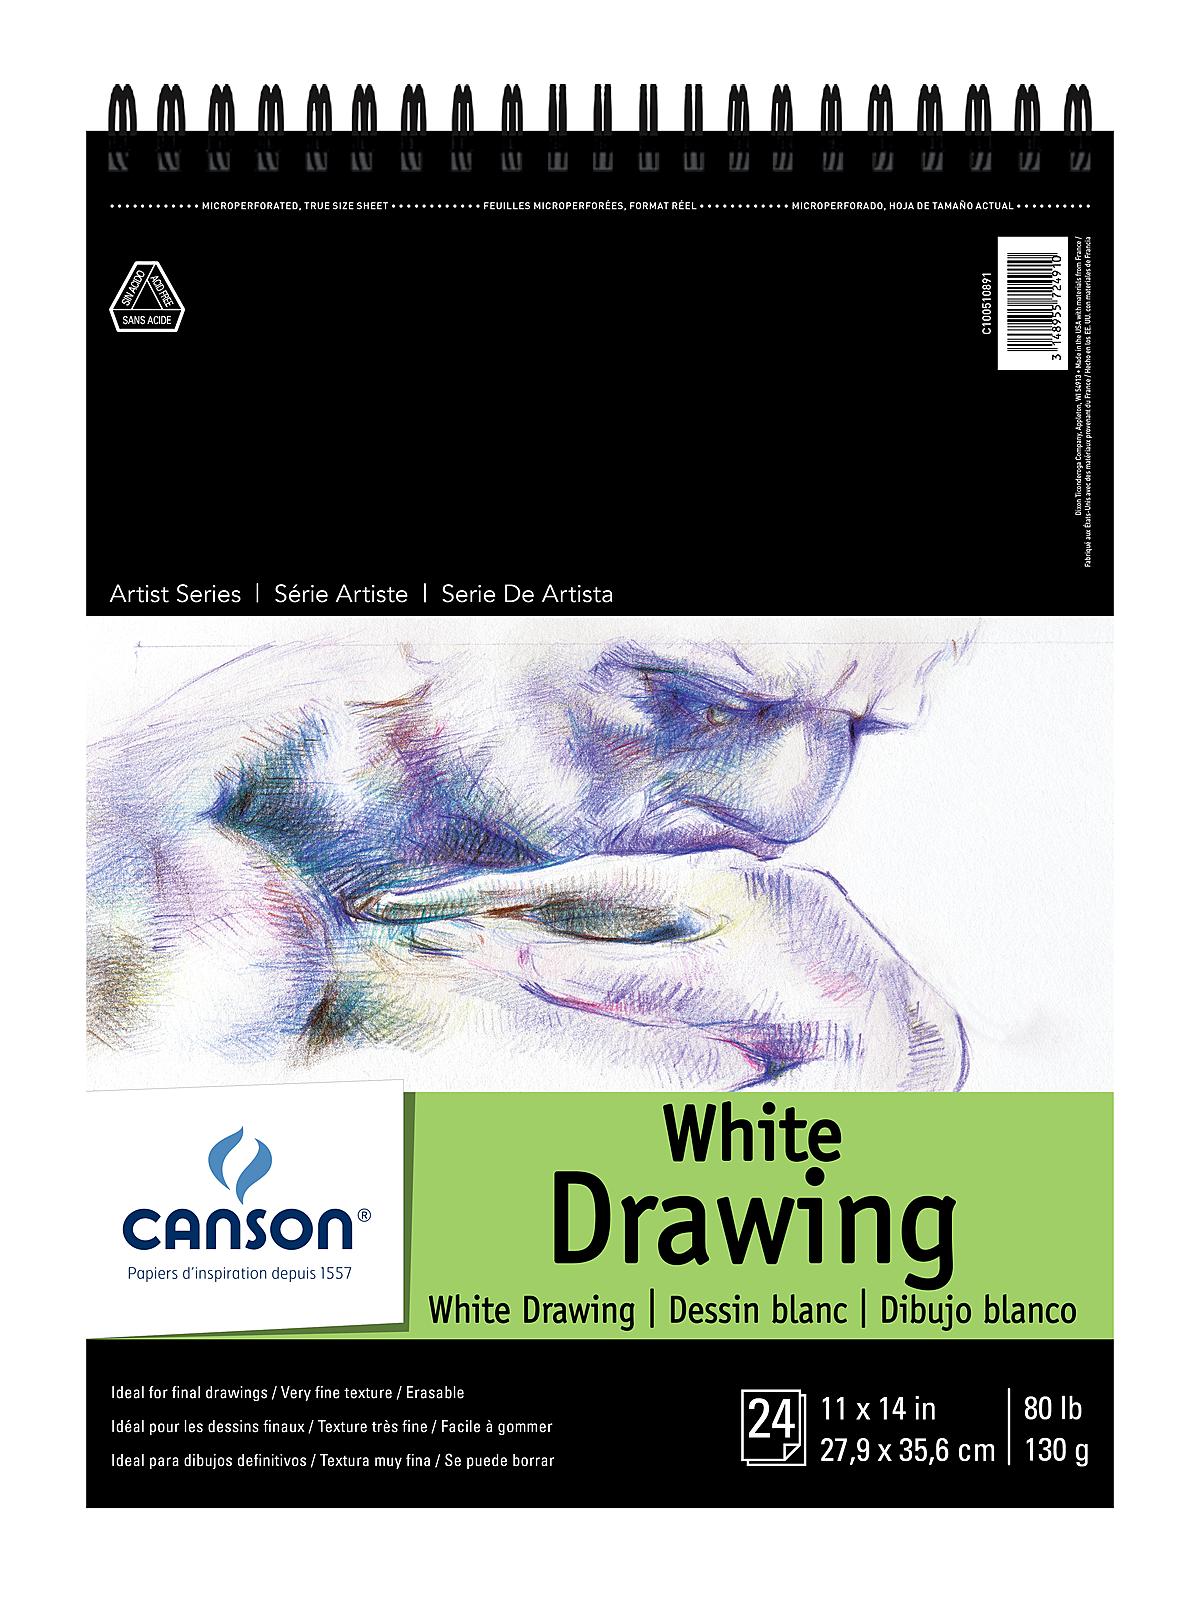 CANSON Pure White Drawing Pads